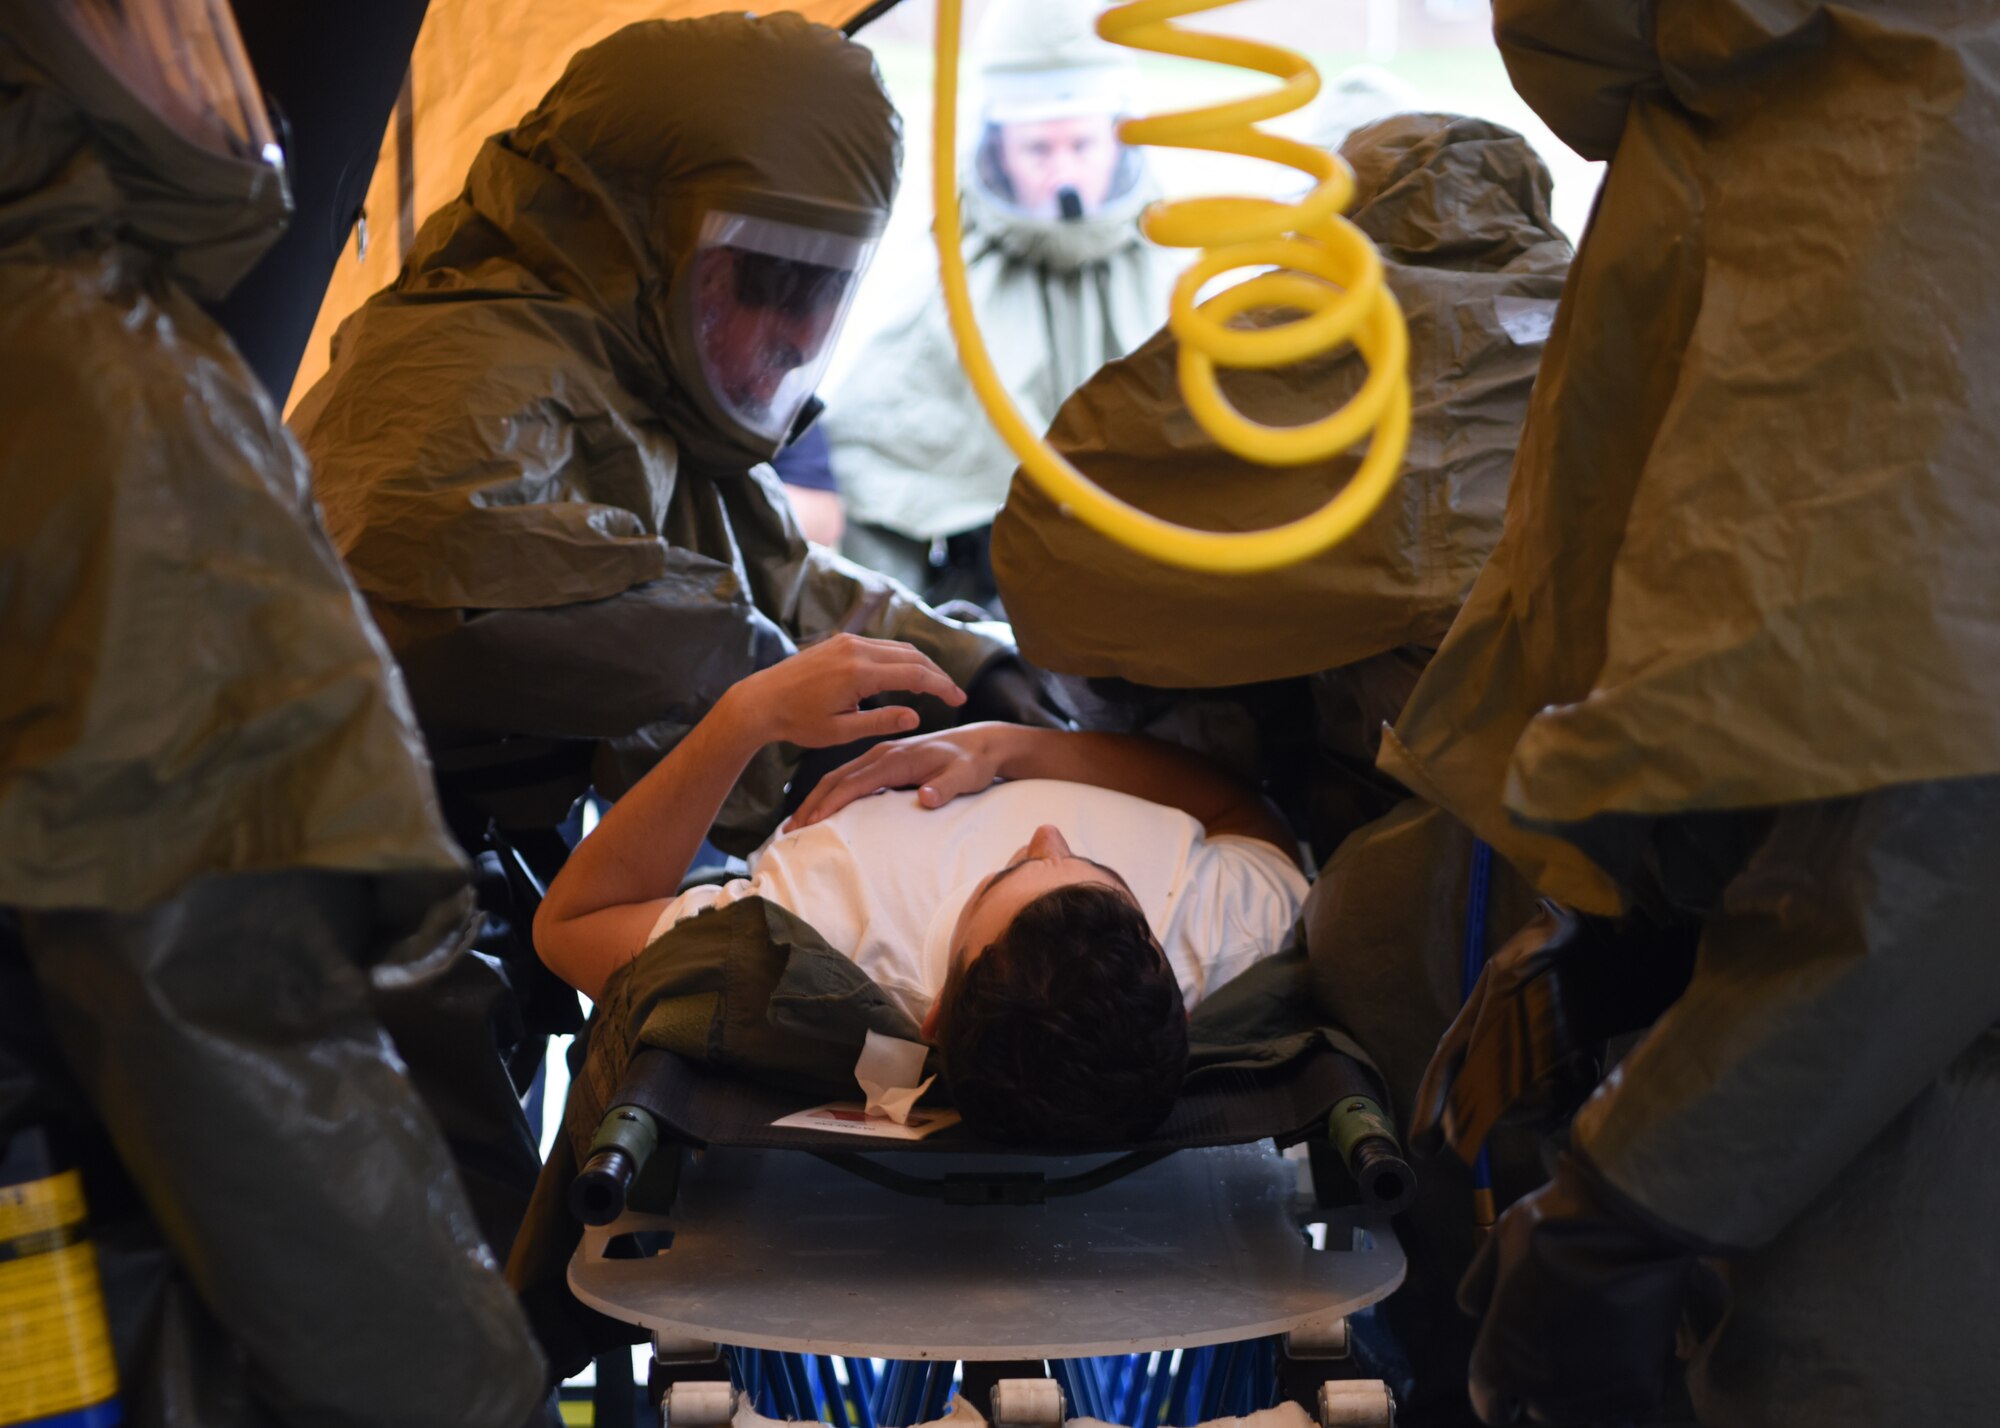 17th Medical Group medics decontaminate a patient during the Ready Eagle exercise on Goodfellow Air Force Base, Texas, Oct. 23, 2020. Patients were moved from a stretcher to a line where they were stripped and decontaminated. (U.S. Air Force photo by Airman 1st Class Ethan Sherwood)